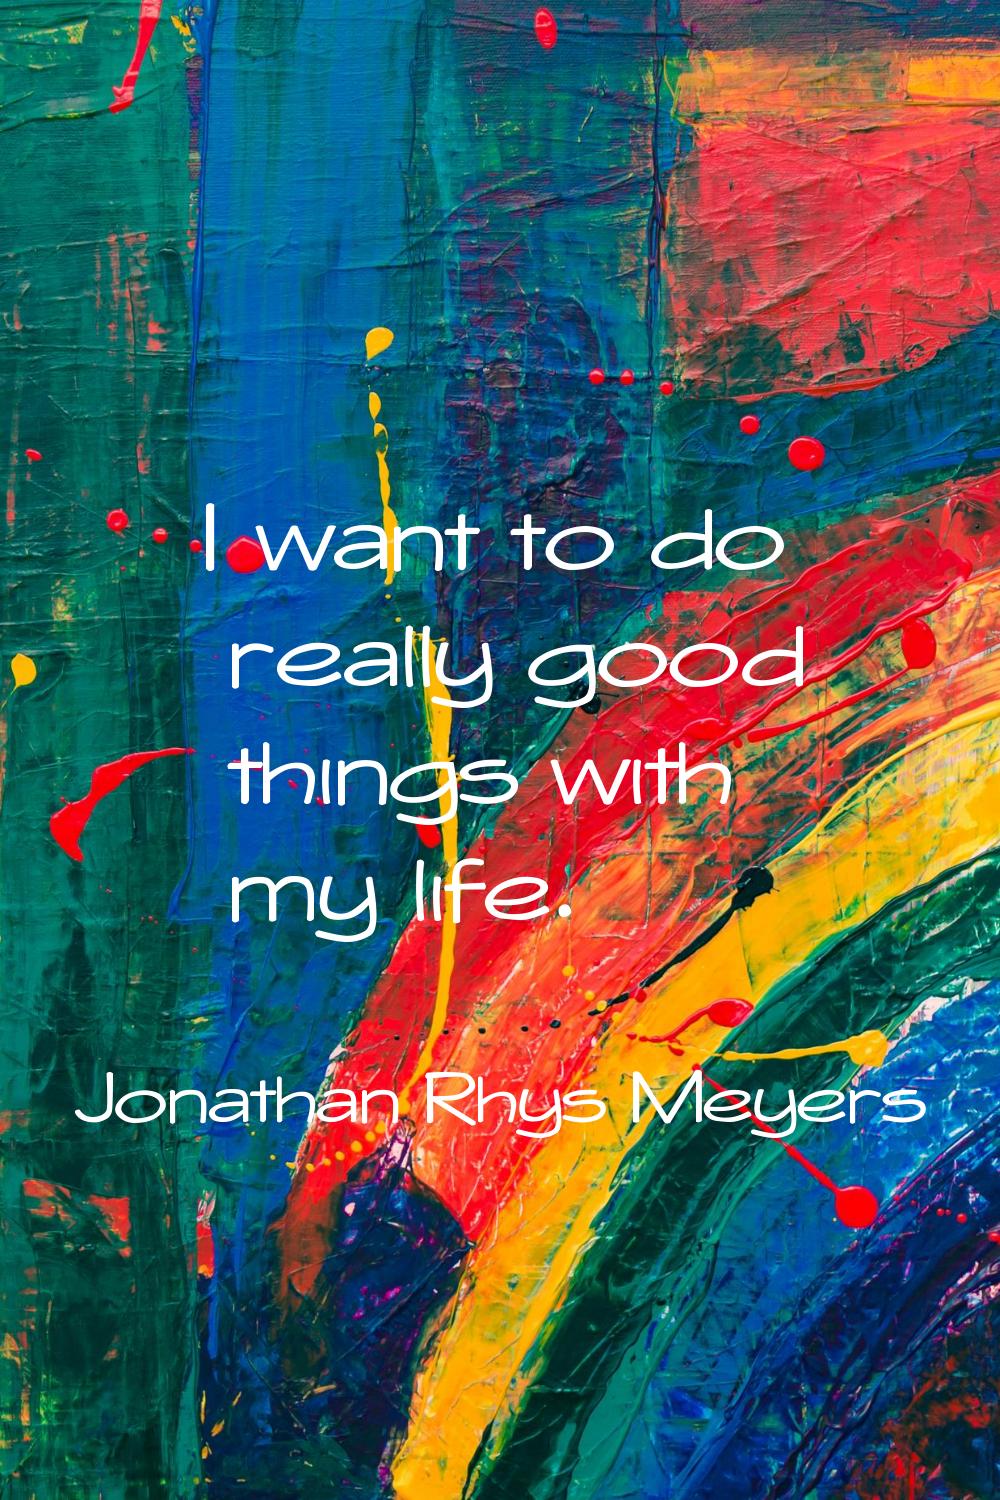 I want to do really good things with my life.